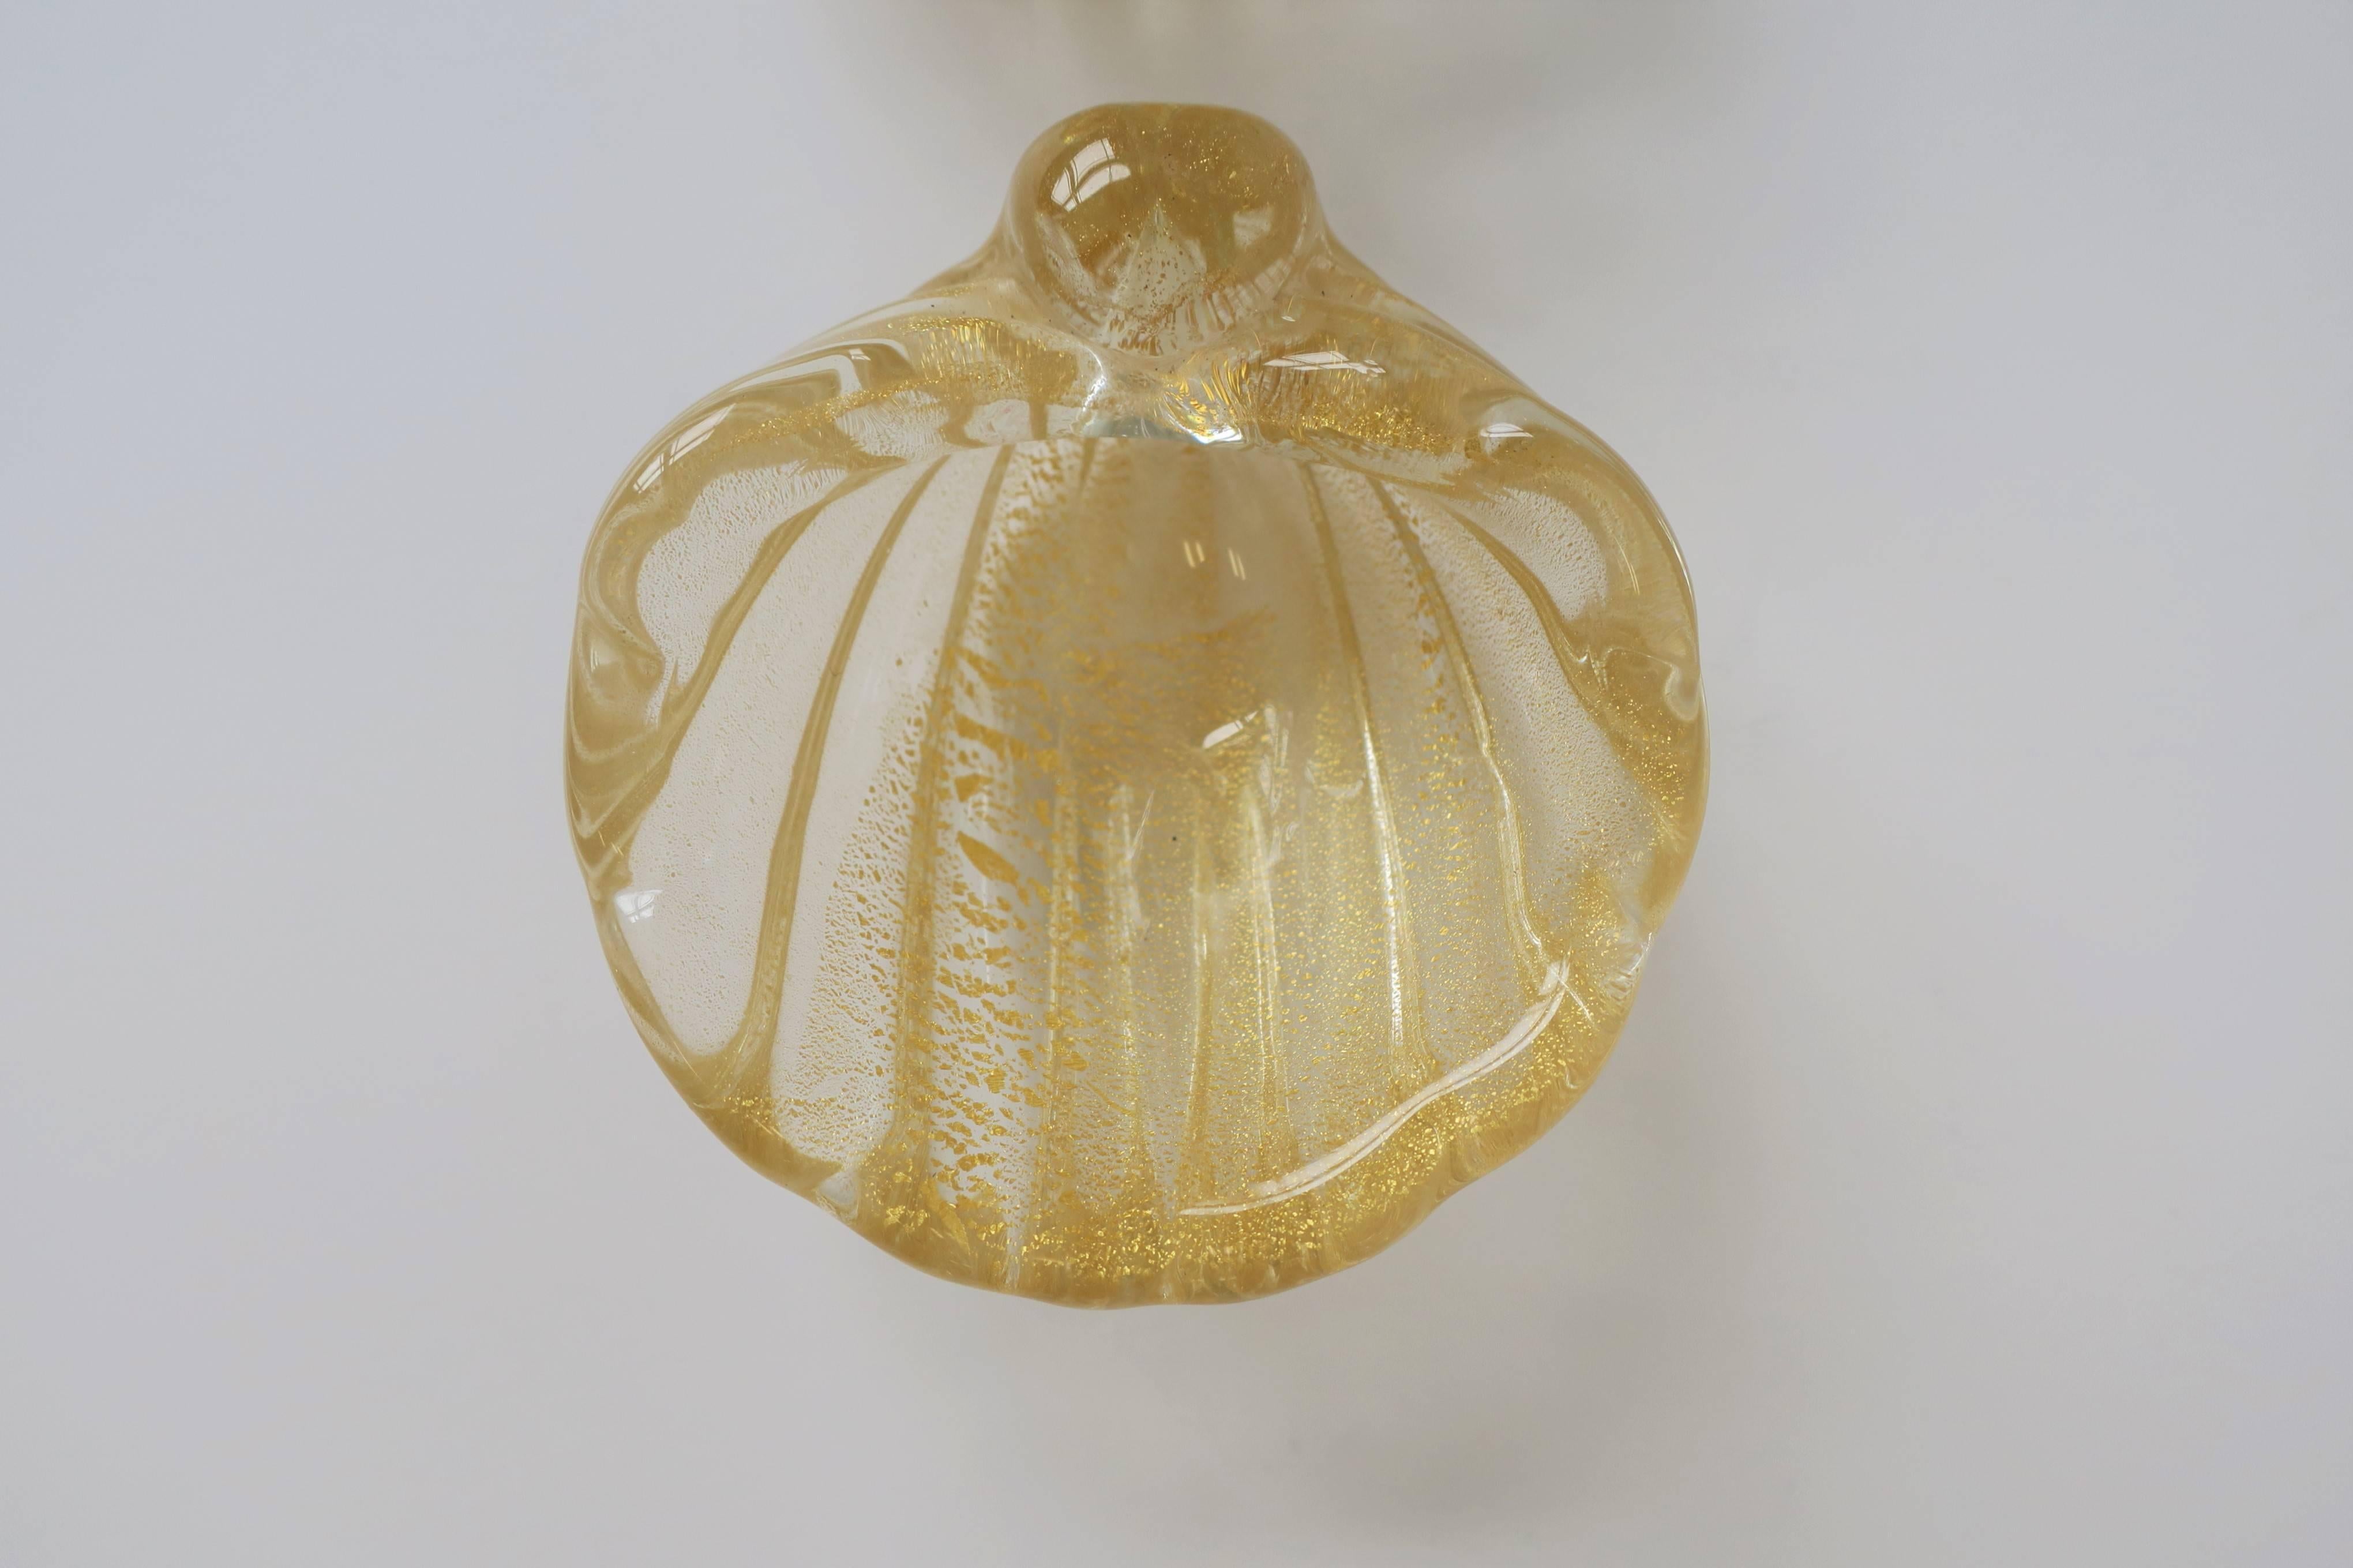 A beautiful small gold and clear hand blown Italian Murano art glass seashell form bowl in the style of Barovier e Toso. This small seashell bowl could be used as decorative piece on a table, desk, or vanity, etc., to hold jewelry or anything small